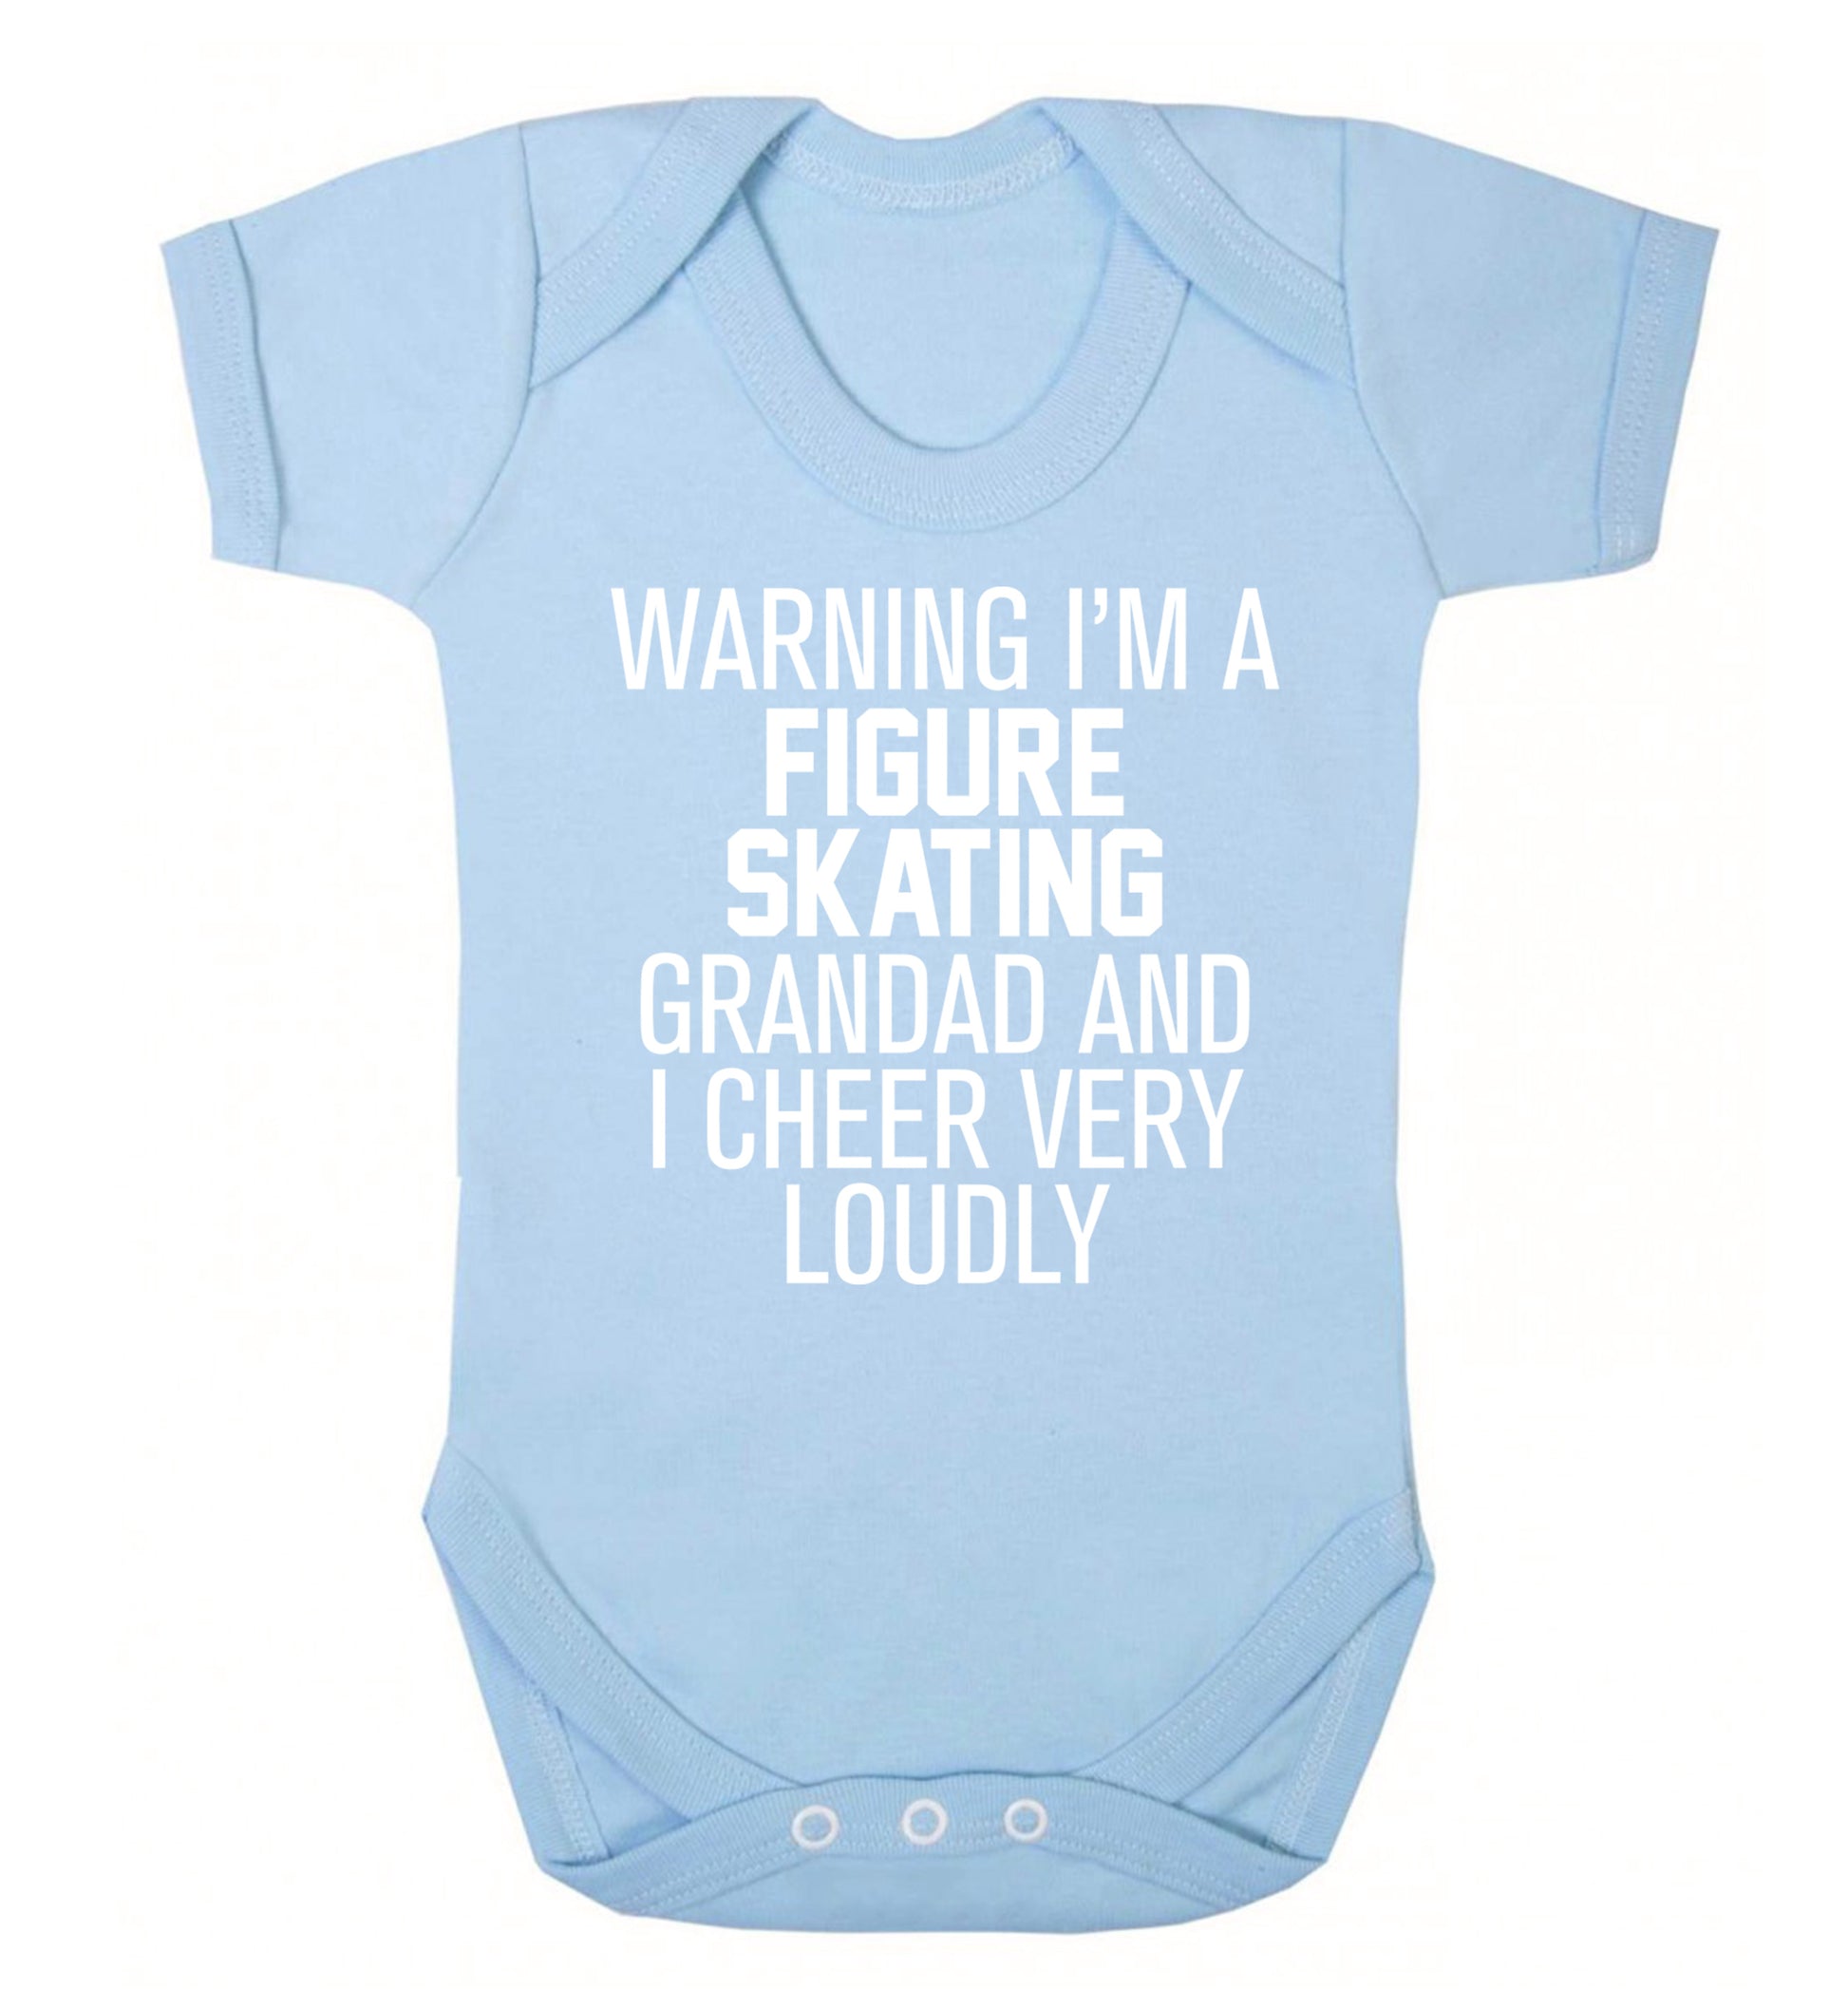 Warning I'm a figure skating grandad and I cheer very loudly Baby Vest pale blue 18-24 months